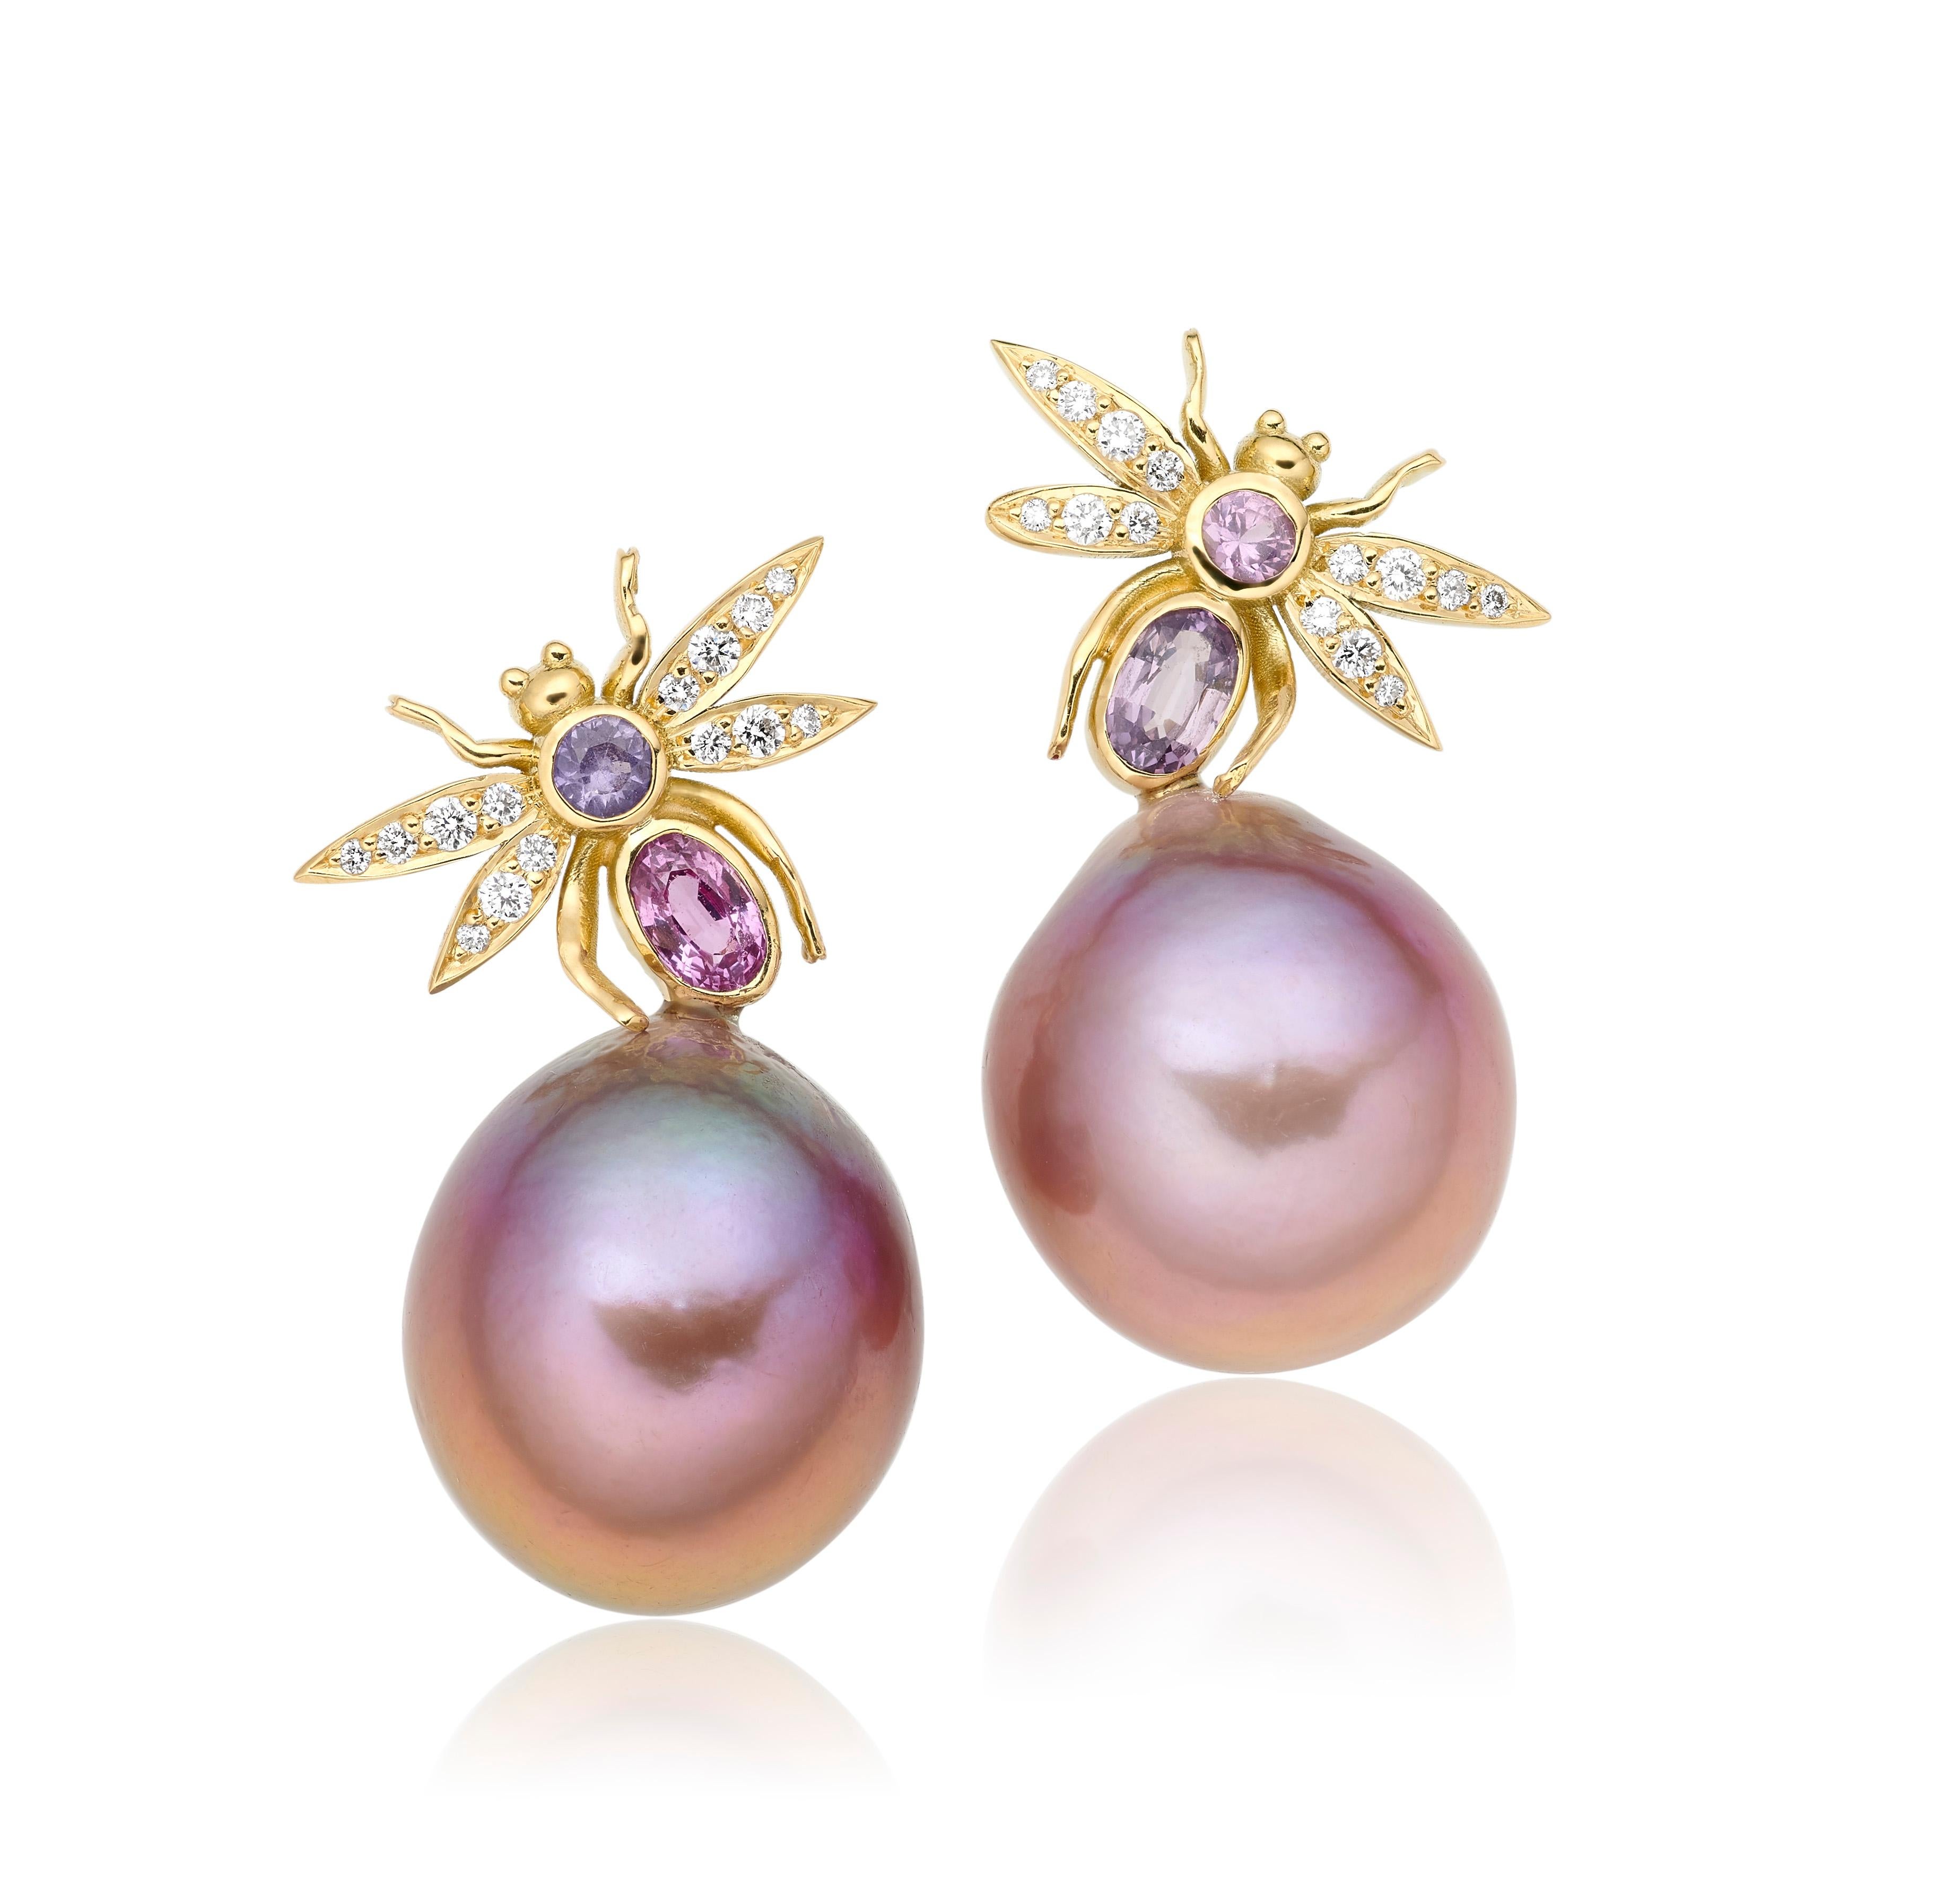 A pair of statement Pearl earrings from Lilly Hastedt's Fauna collection.  The insects are set with sparkling diamonds and lavender and pink Sapphires; finished off with a pair of deep lavender Freshwater Pearls. Set in 18 Karat gold.

Classic yet